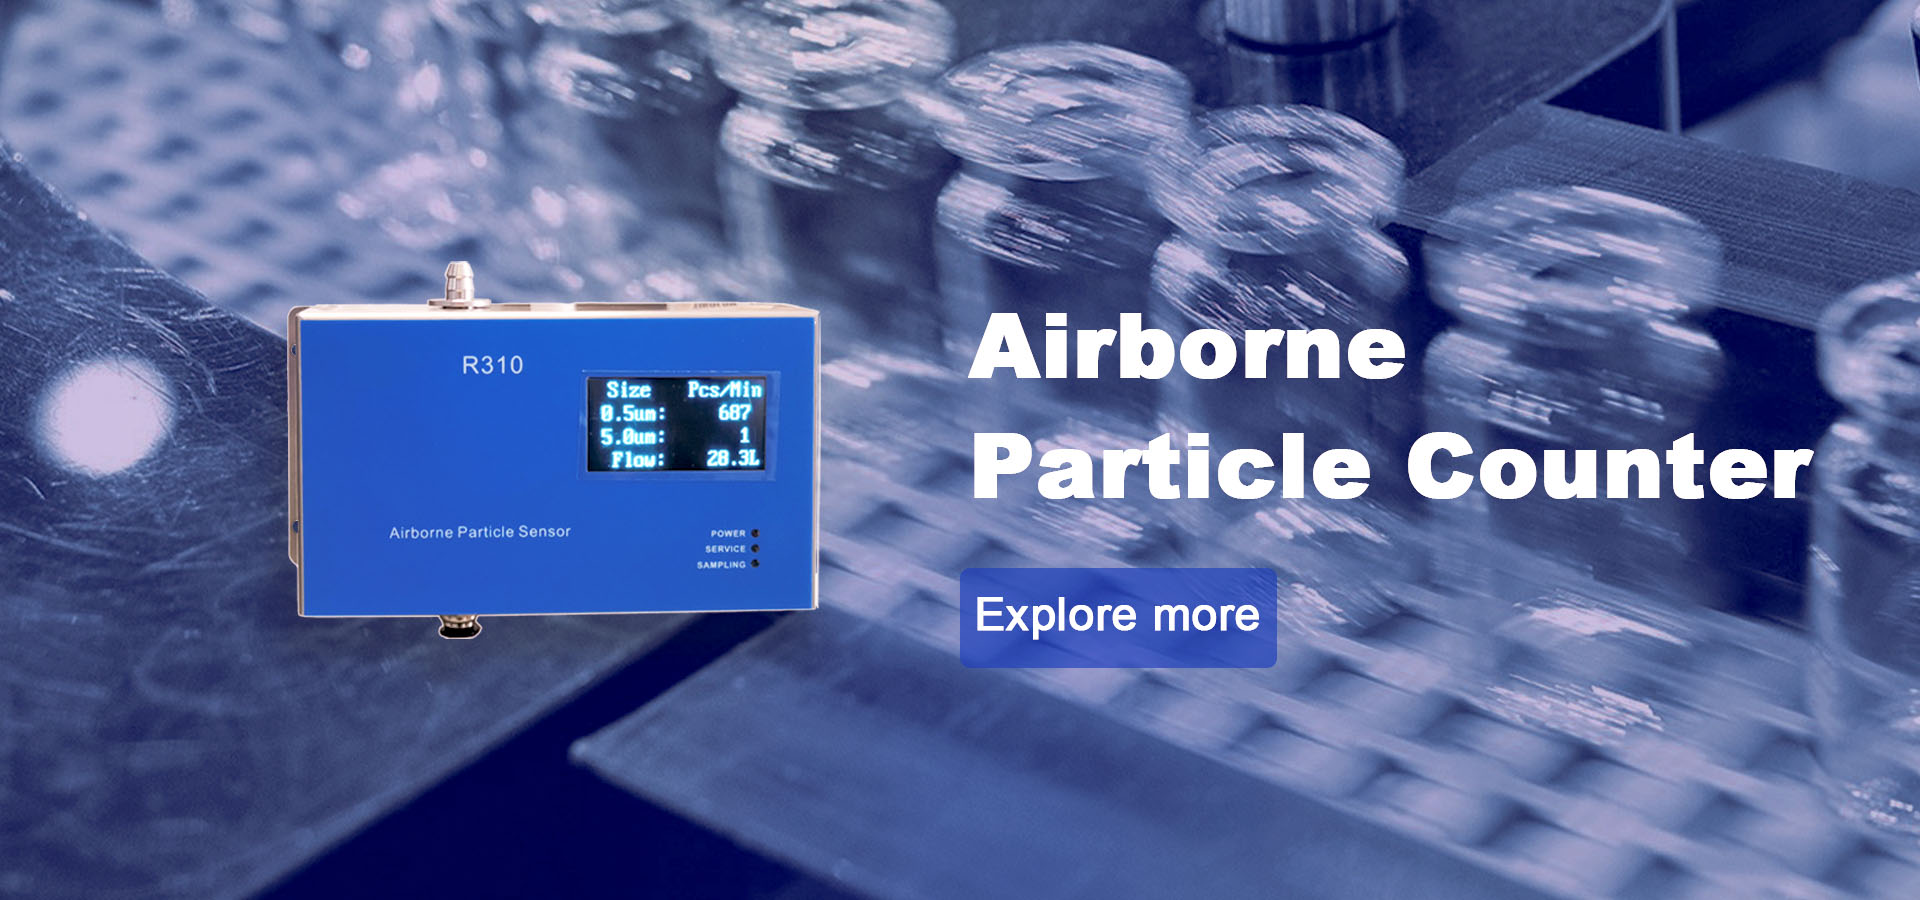 Air quality monitoring device